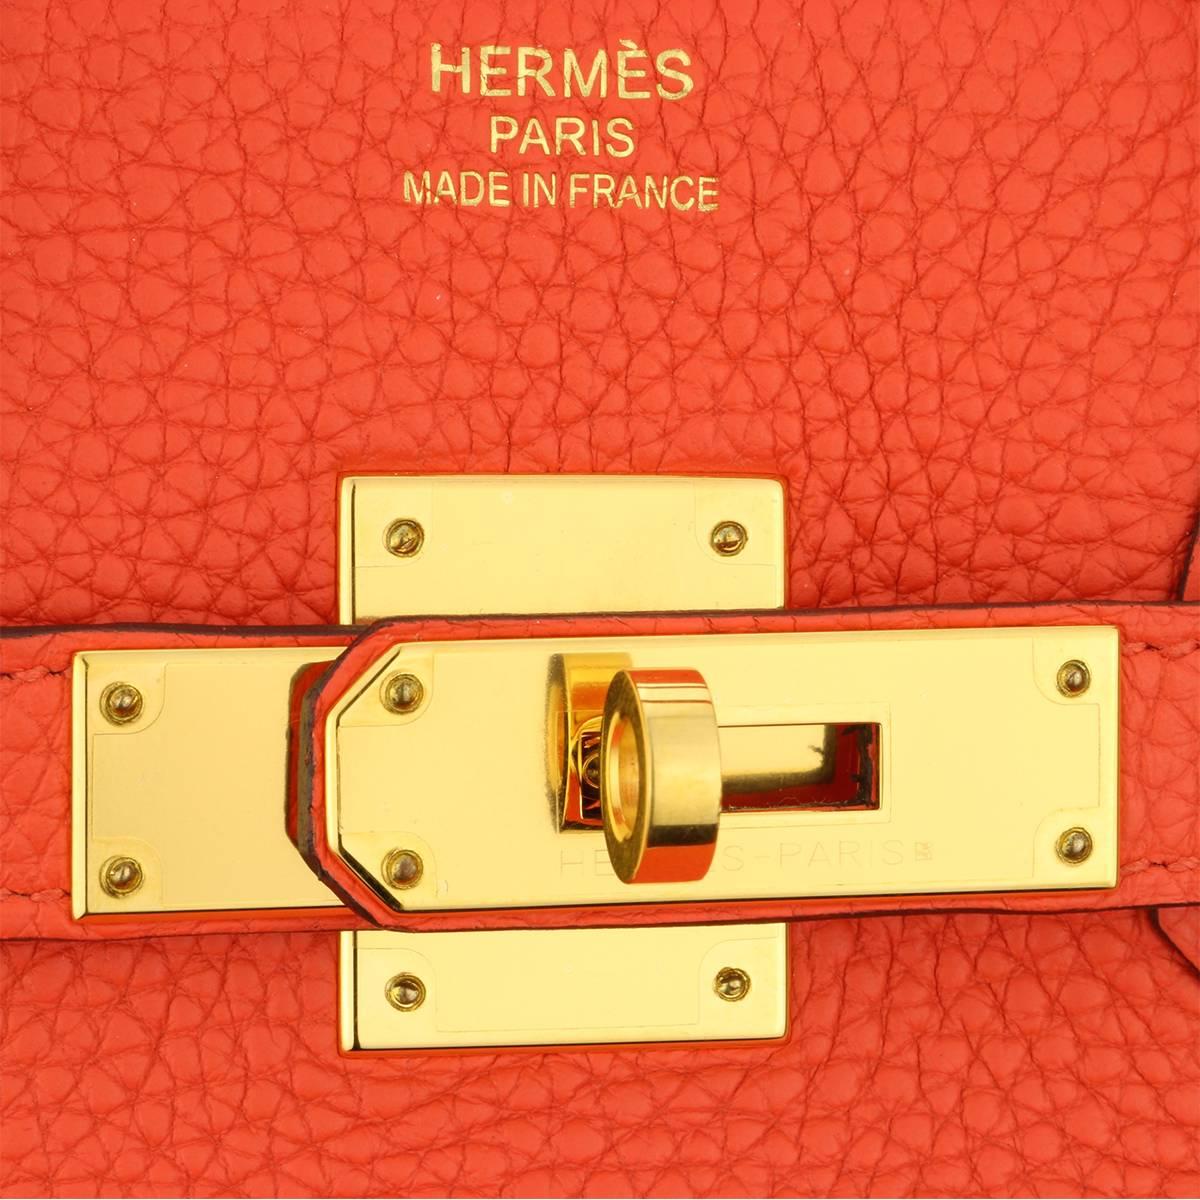 Authentic Hermès Birkin 35cm Orange Togo Leather with Gold Hardware Stamp T_Year 2015

This stunning bag is still in a mint-pristine condition, the bag still holds its original shape, the hardware is still very shiny, and the leather still smells